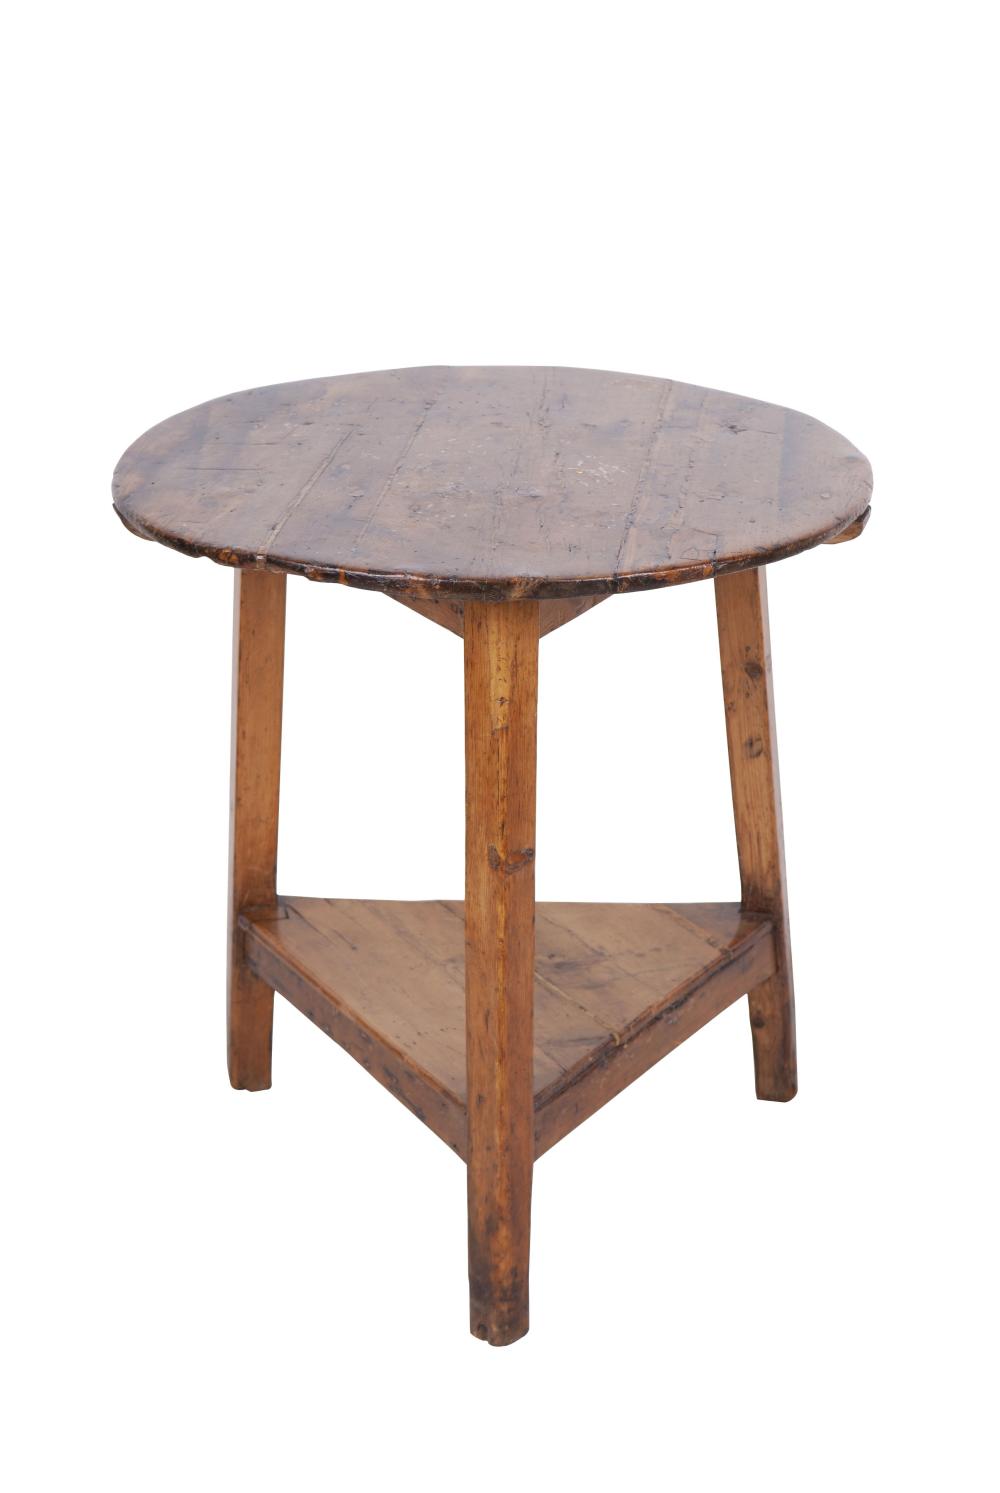 ENGLISH PINE CRICKET TABLE27 inches 335c84